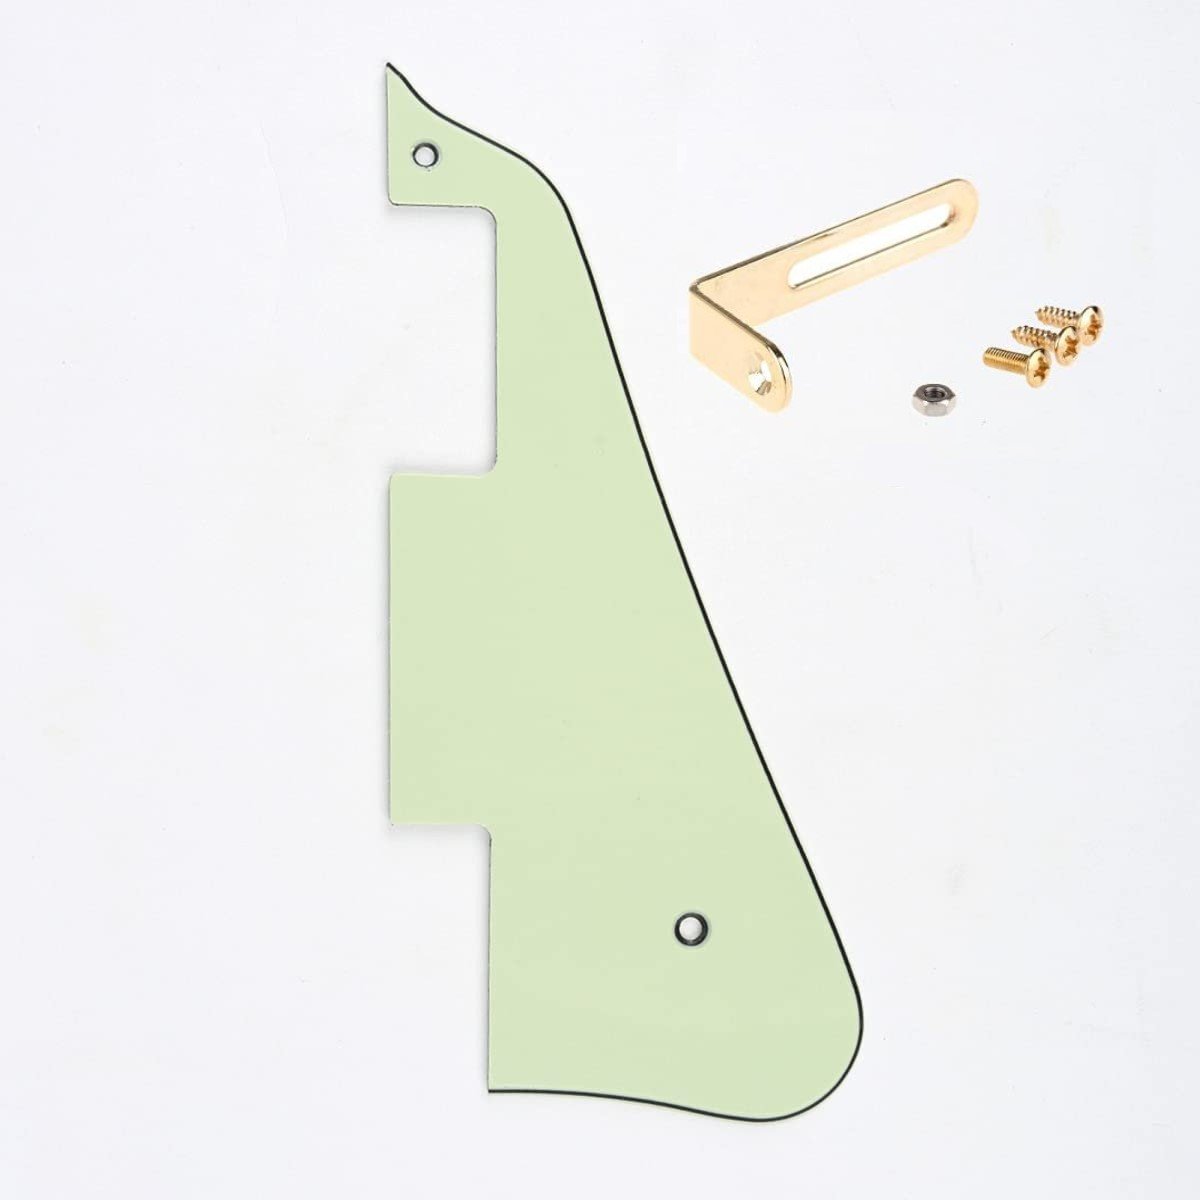 LP Guitar Pickguard for Chinese Made Epiphone Standard Modern Style with Bracket